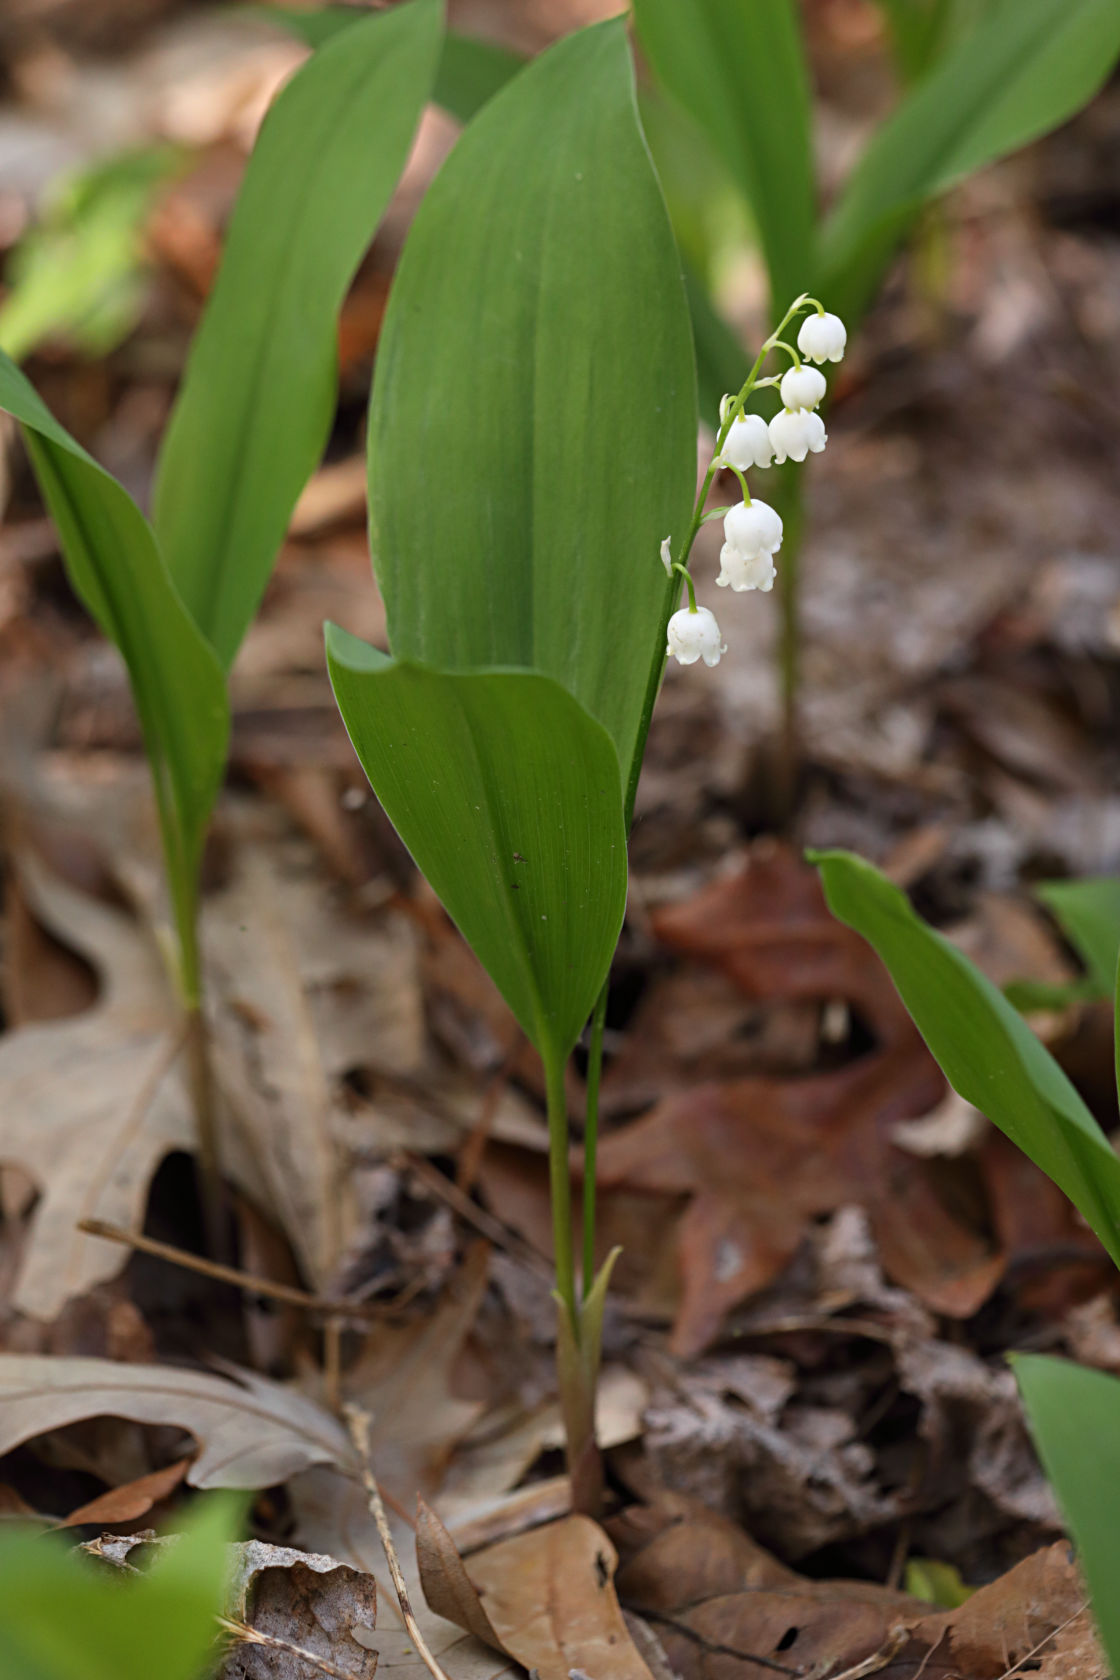 Lily of the Valley